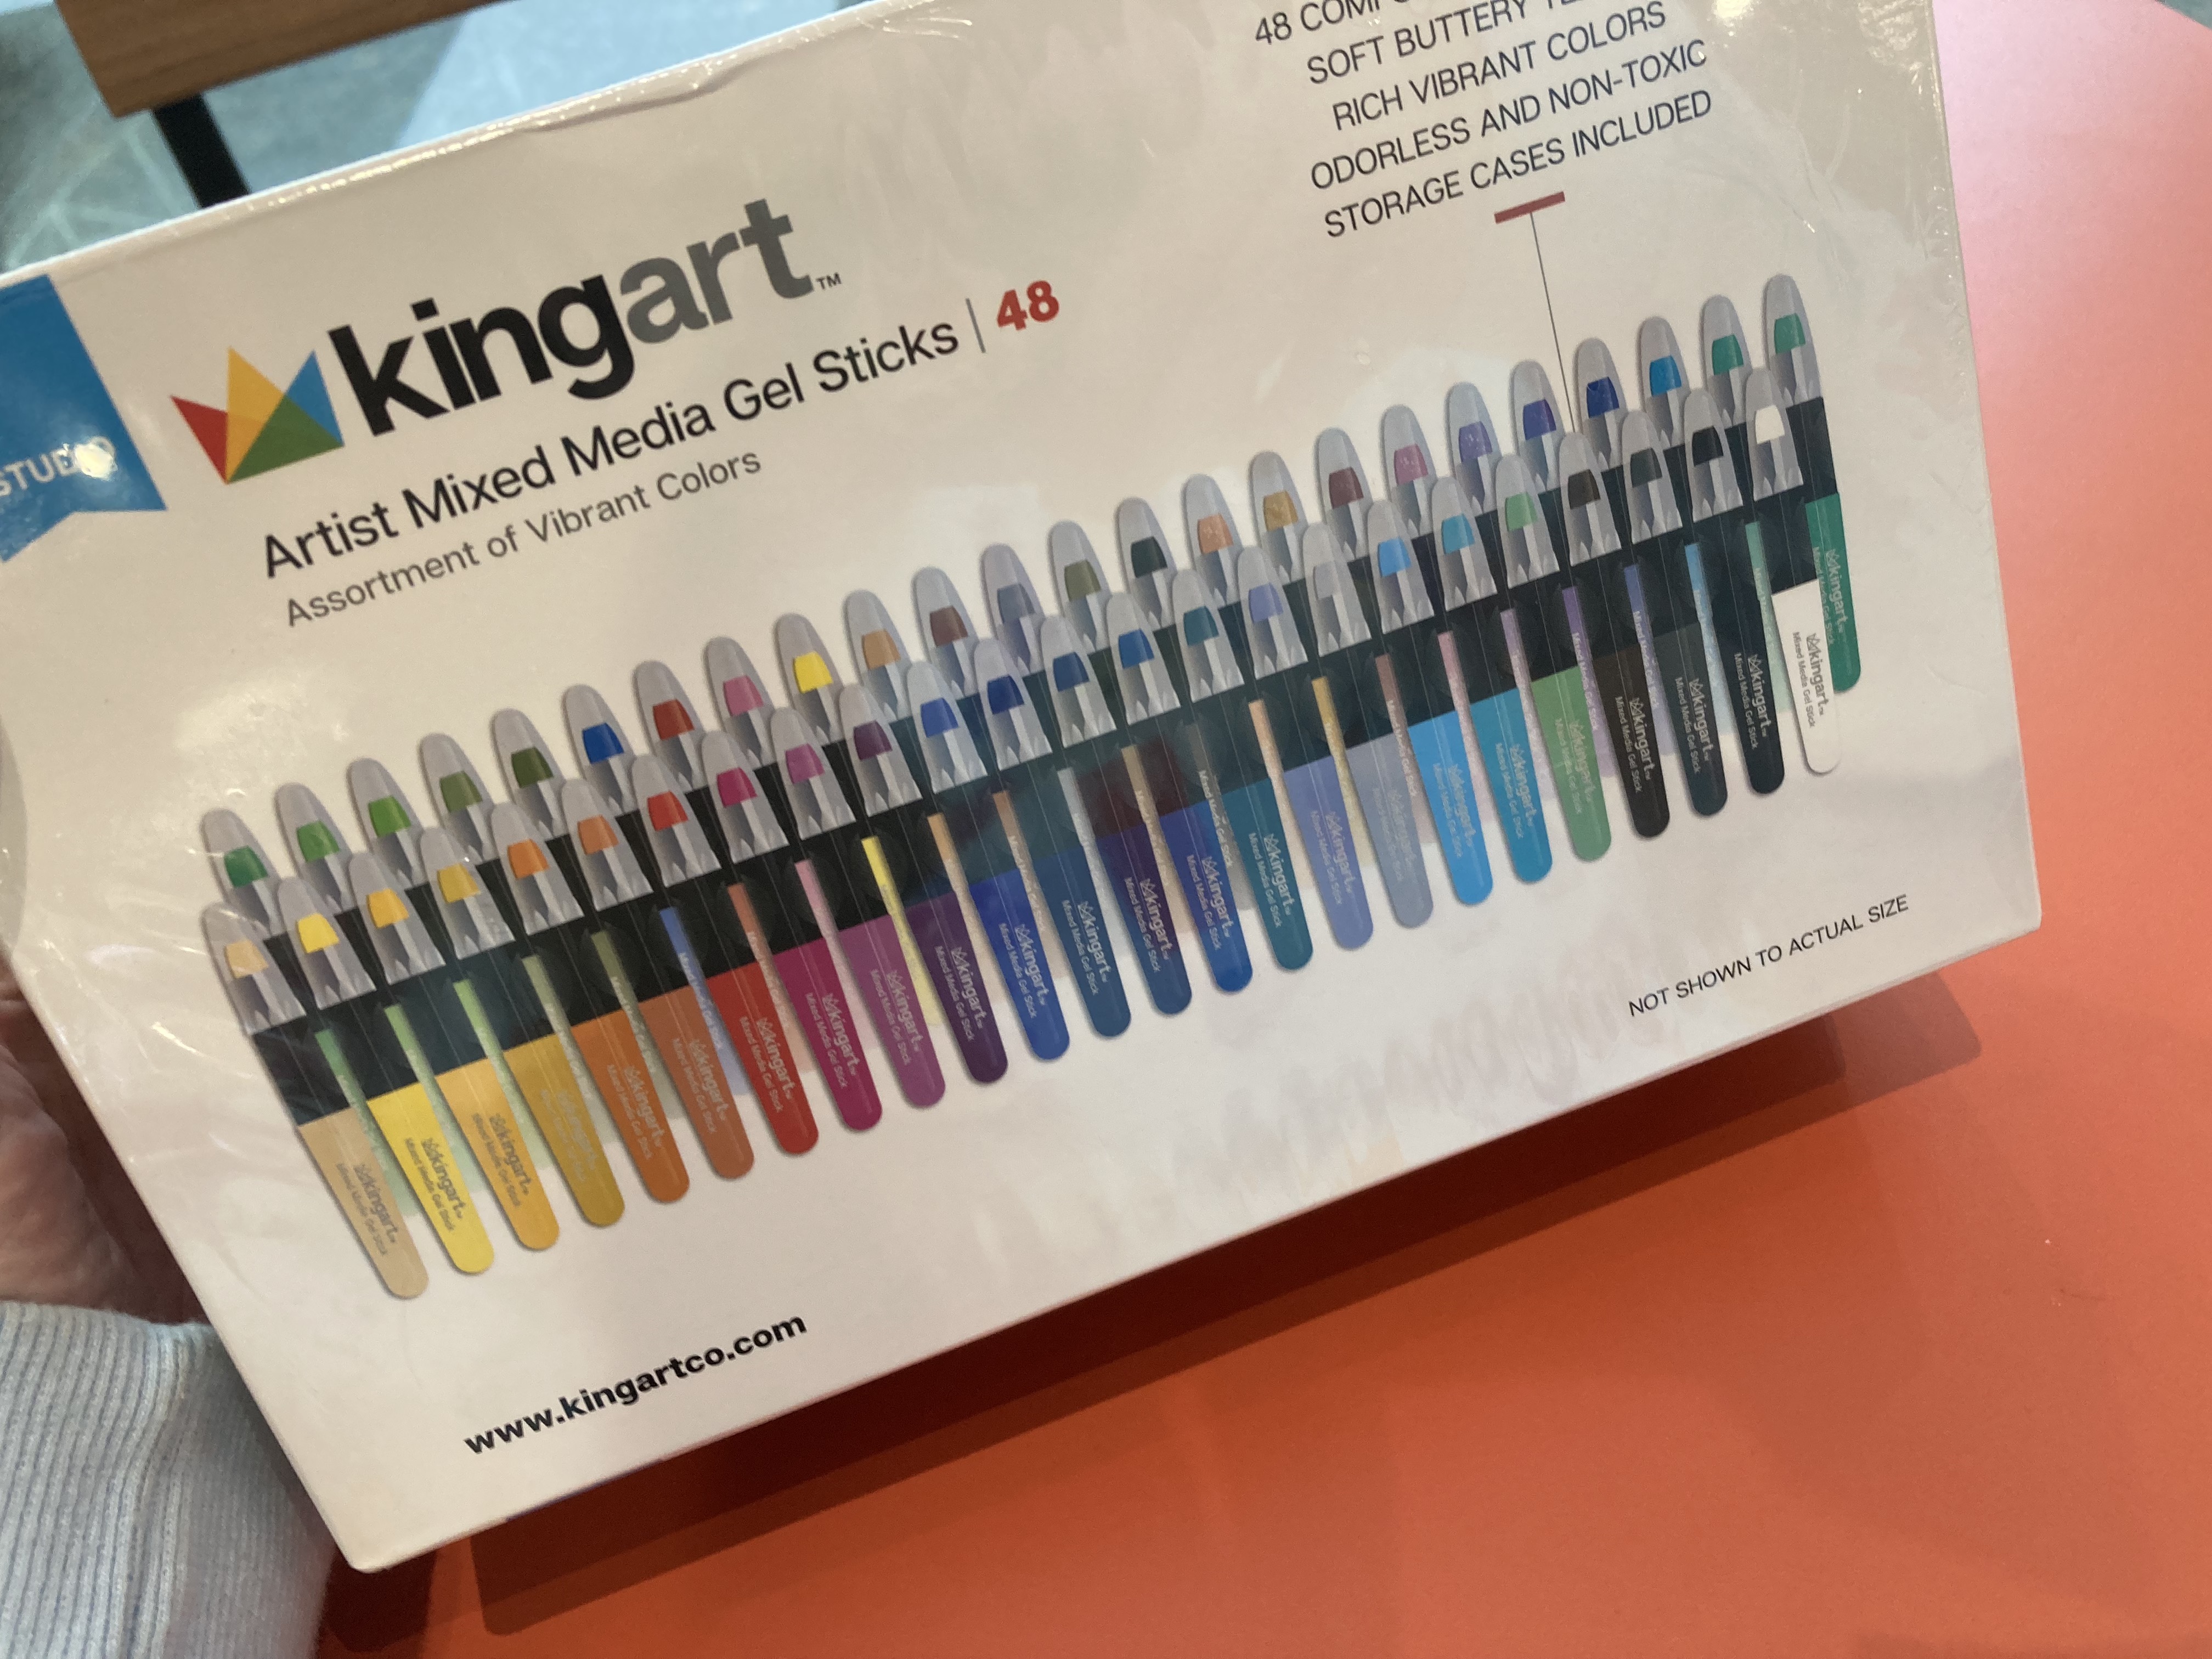 Have You Heard Of Kingart? Art Crayon, Gel Stick Review – By Samantha Webb